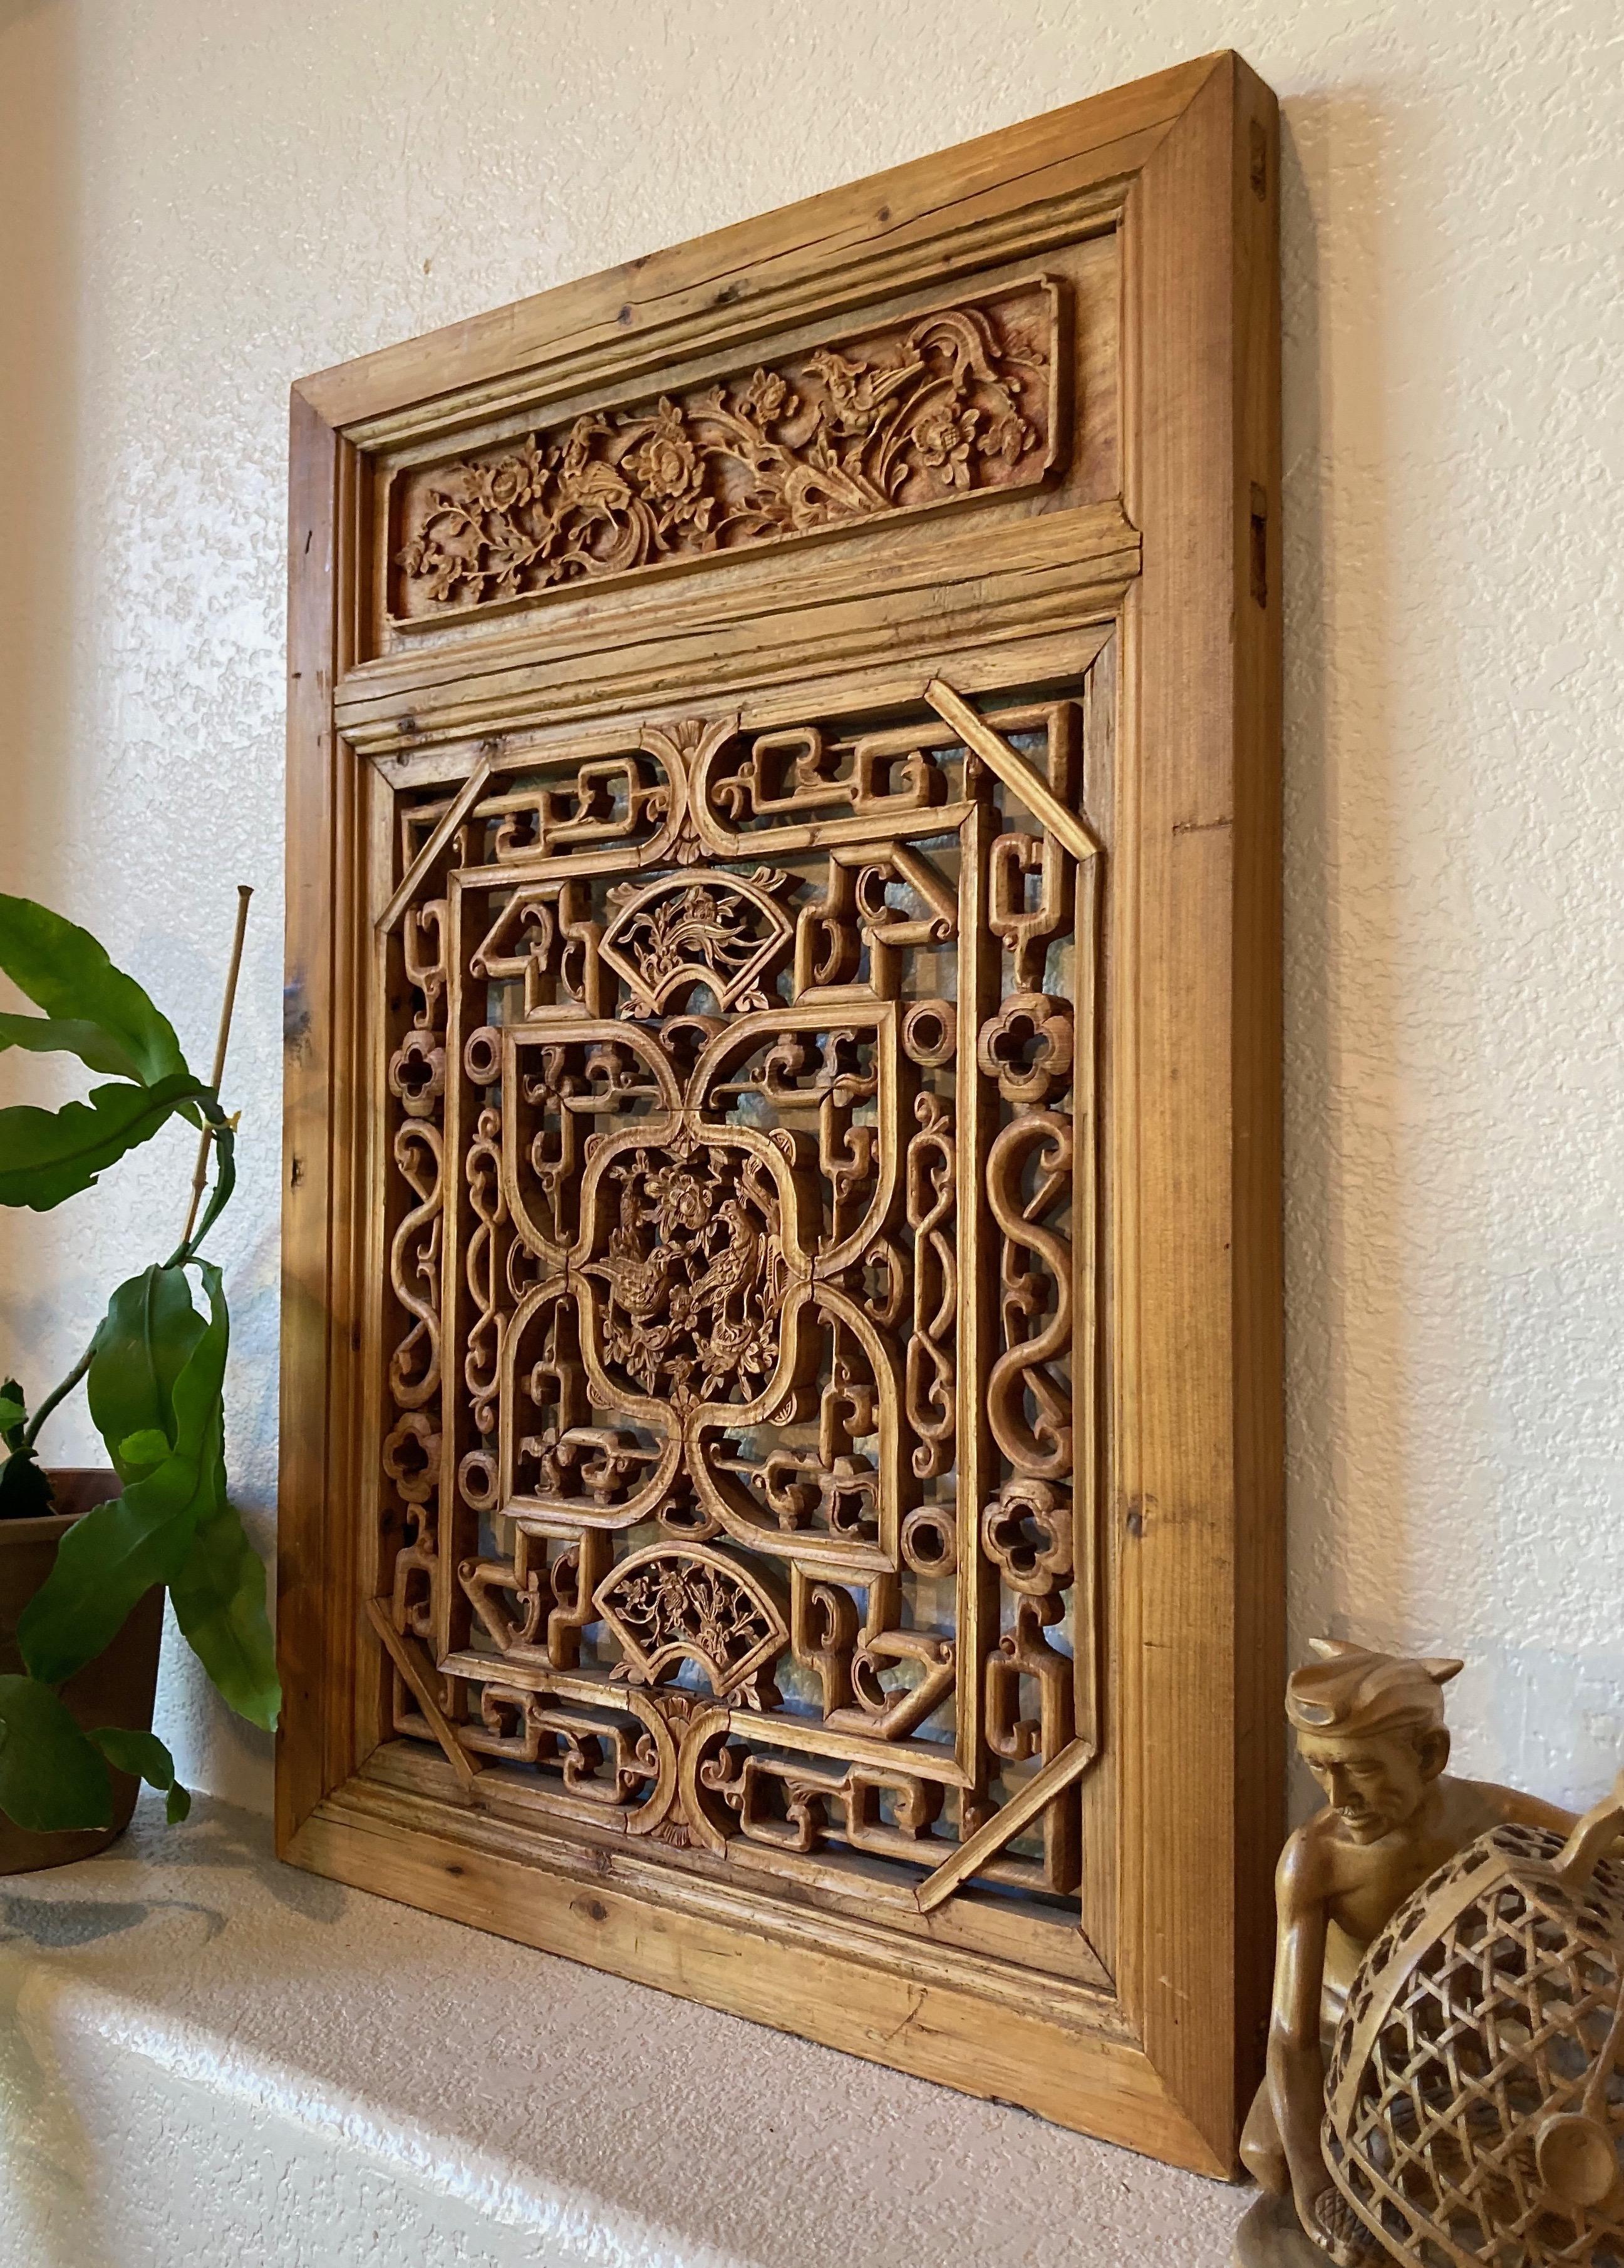 Framed panel, center carving with birds. Top and bottom panes with fan shaped carvings and floral motifs.